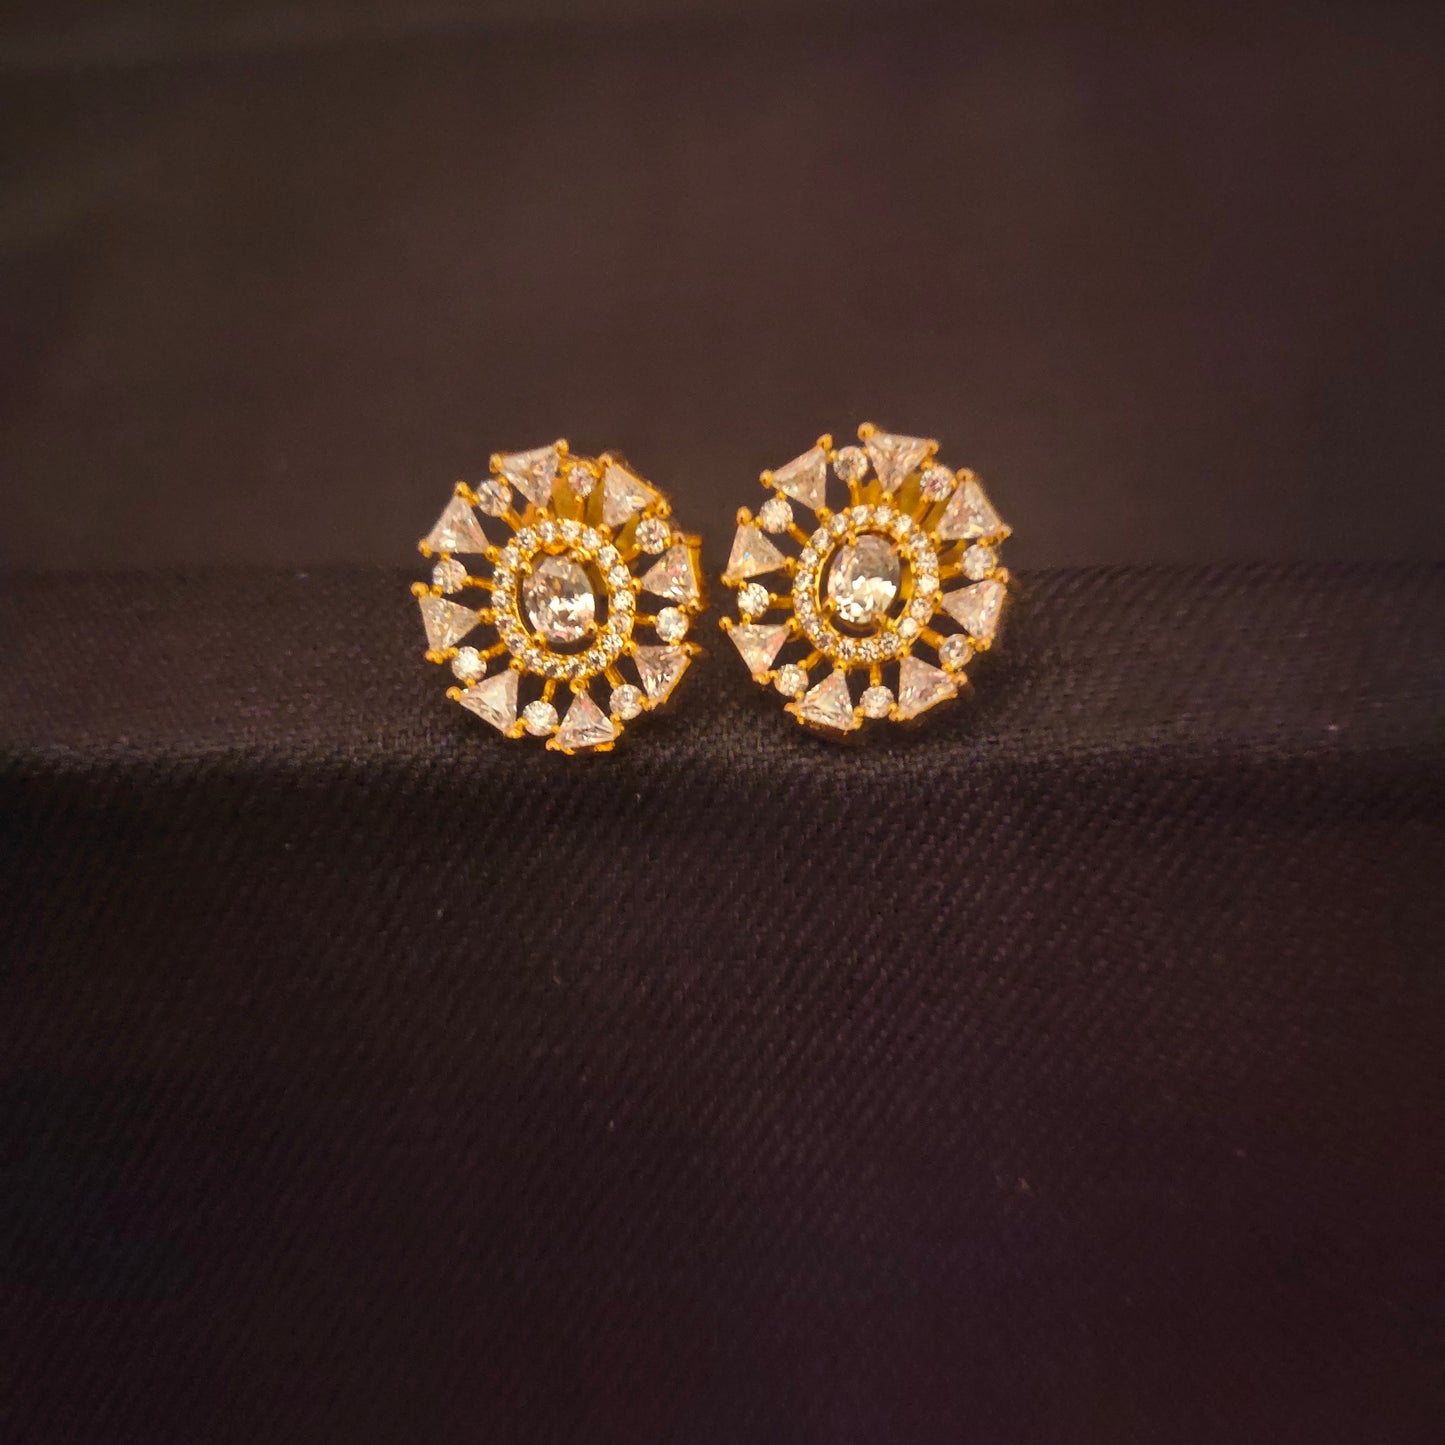 "Dazzling Elegance: Elevate Your Style with Asp Fashion Jewellery’s Classy American Diamond Studs Earrings"